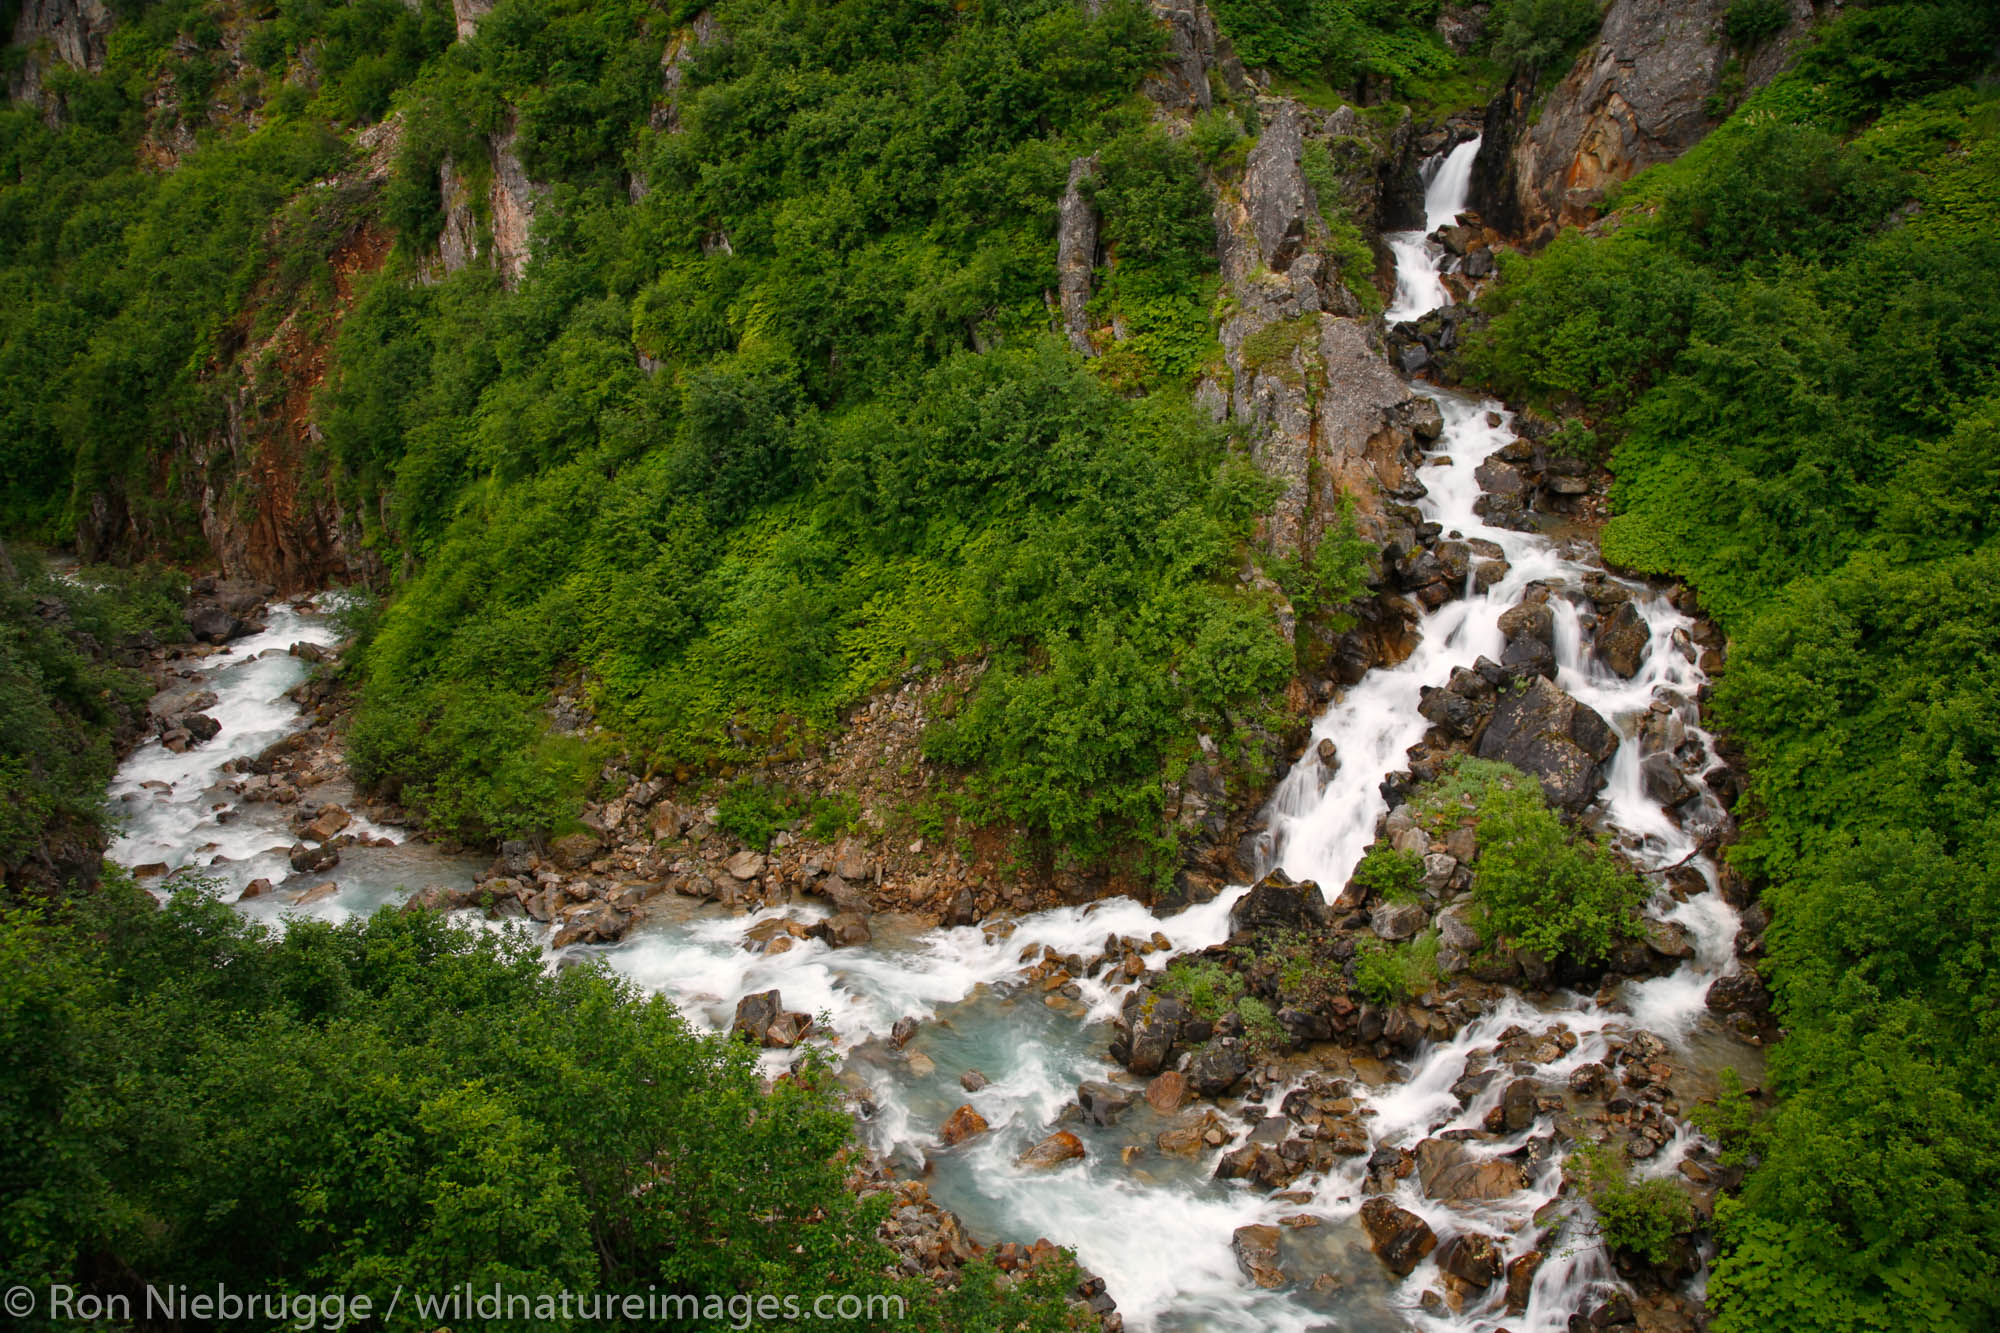 Waterfall in the Tongass National Forest, near Skagway, Alaska.